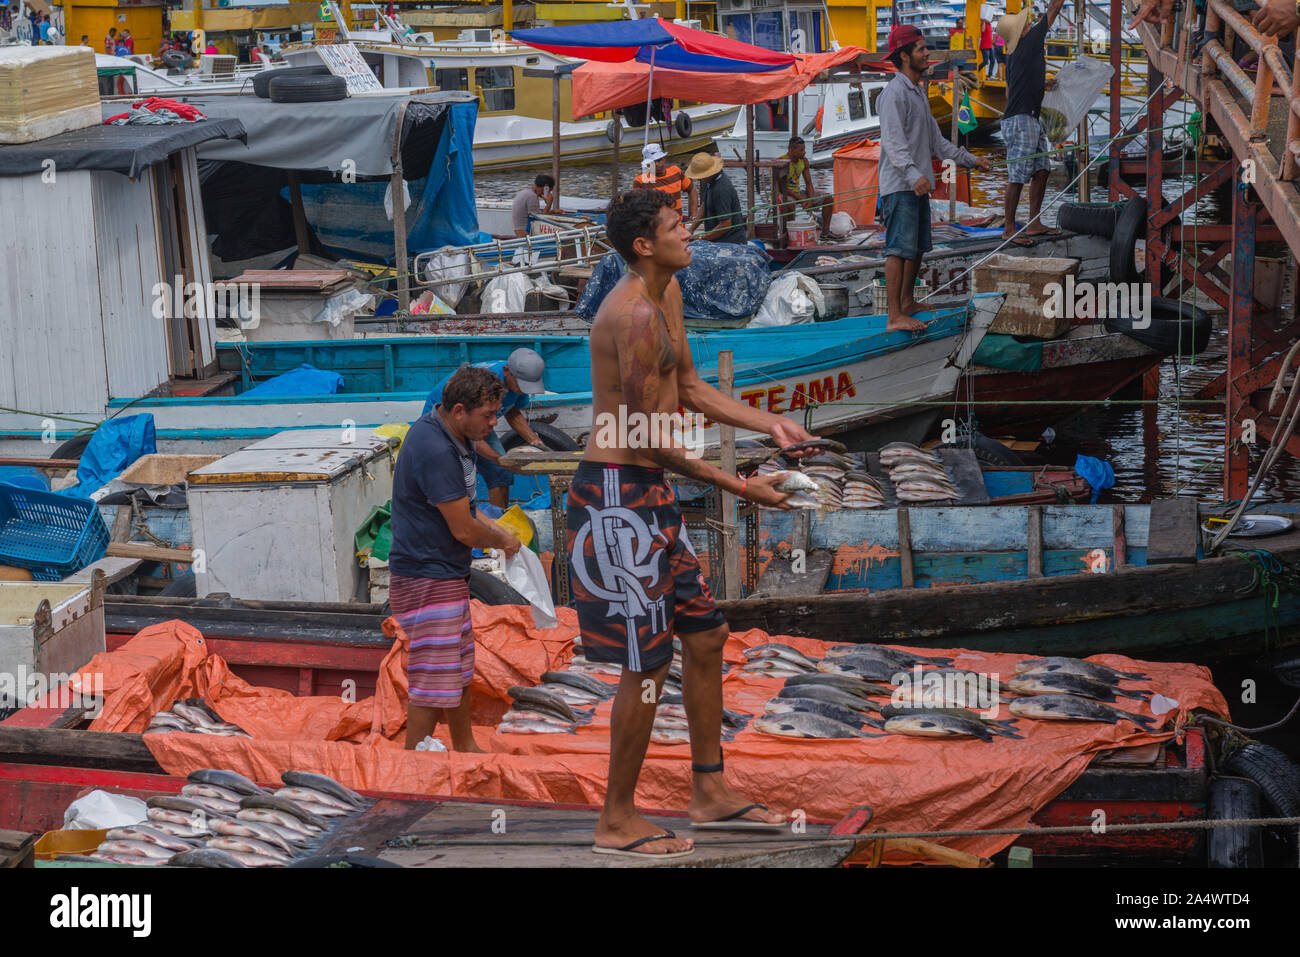 The fishing habor in Porto Flutante or Floating Habour, open fishing boats with owners selling fresh fish, Manaus, The Amazon, Brazil, Latin America Stock Photo